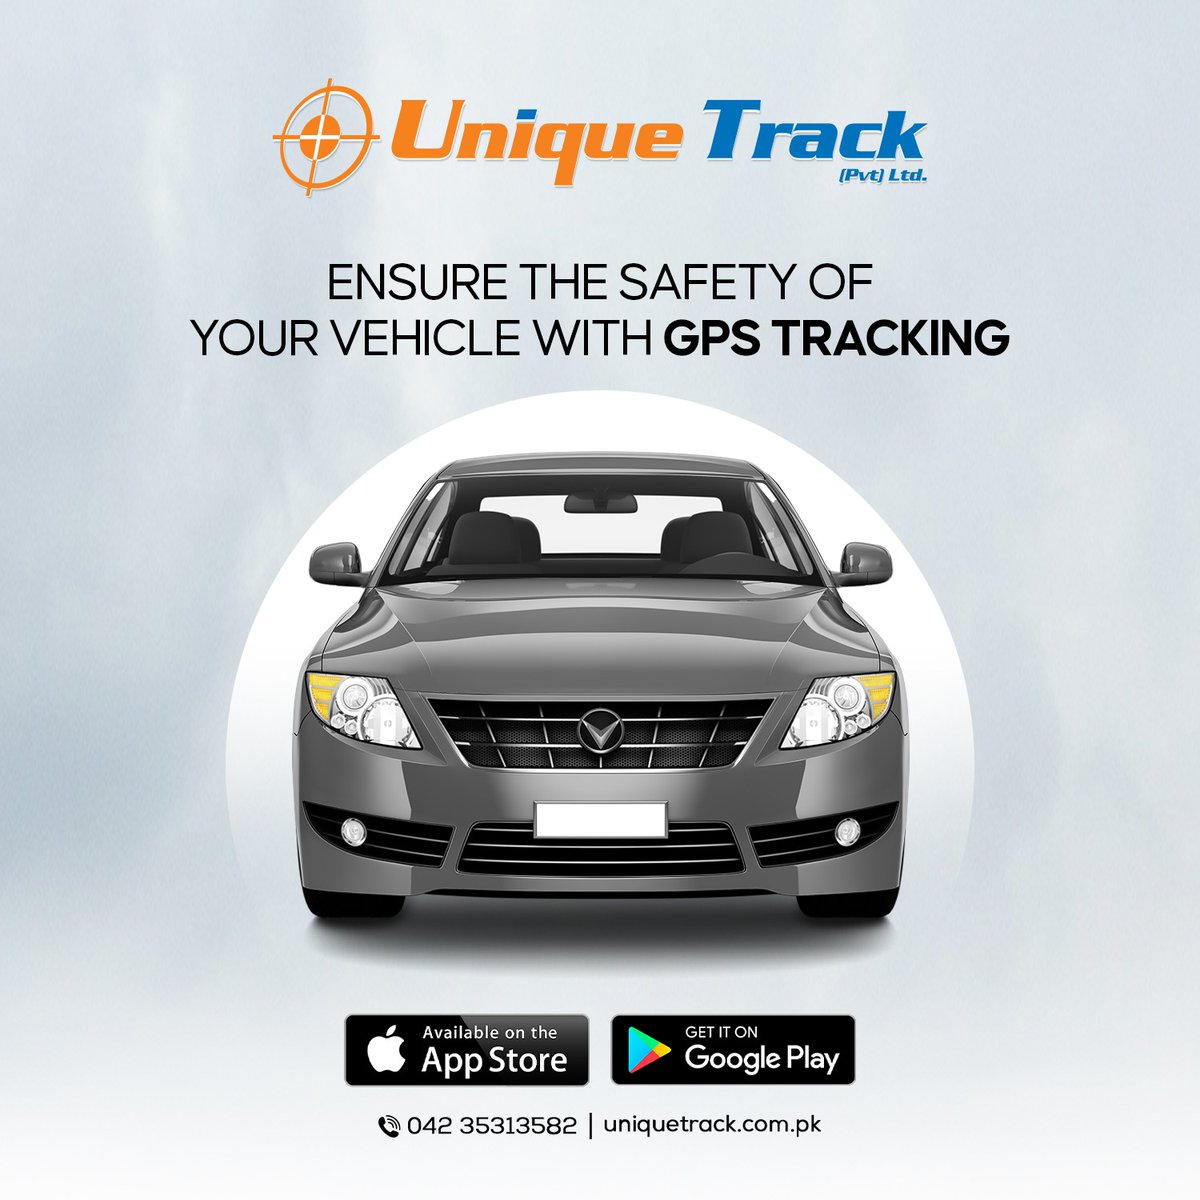 Ready to take control? Safeguard your car and never worry about its safety again. 🌟🔒
📱 : 03234444434
#UniqueTrack #GPSCarTracker #LiveTracker #CarTracker #VehicleTrackingSystems #BestCarTrackingCompanies #TrackerVehicleTracking #BestTrackerForCar #TrackerVehicleTrackingSystem